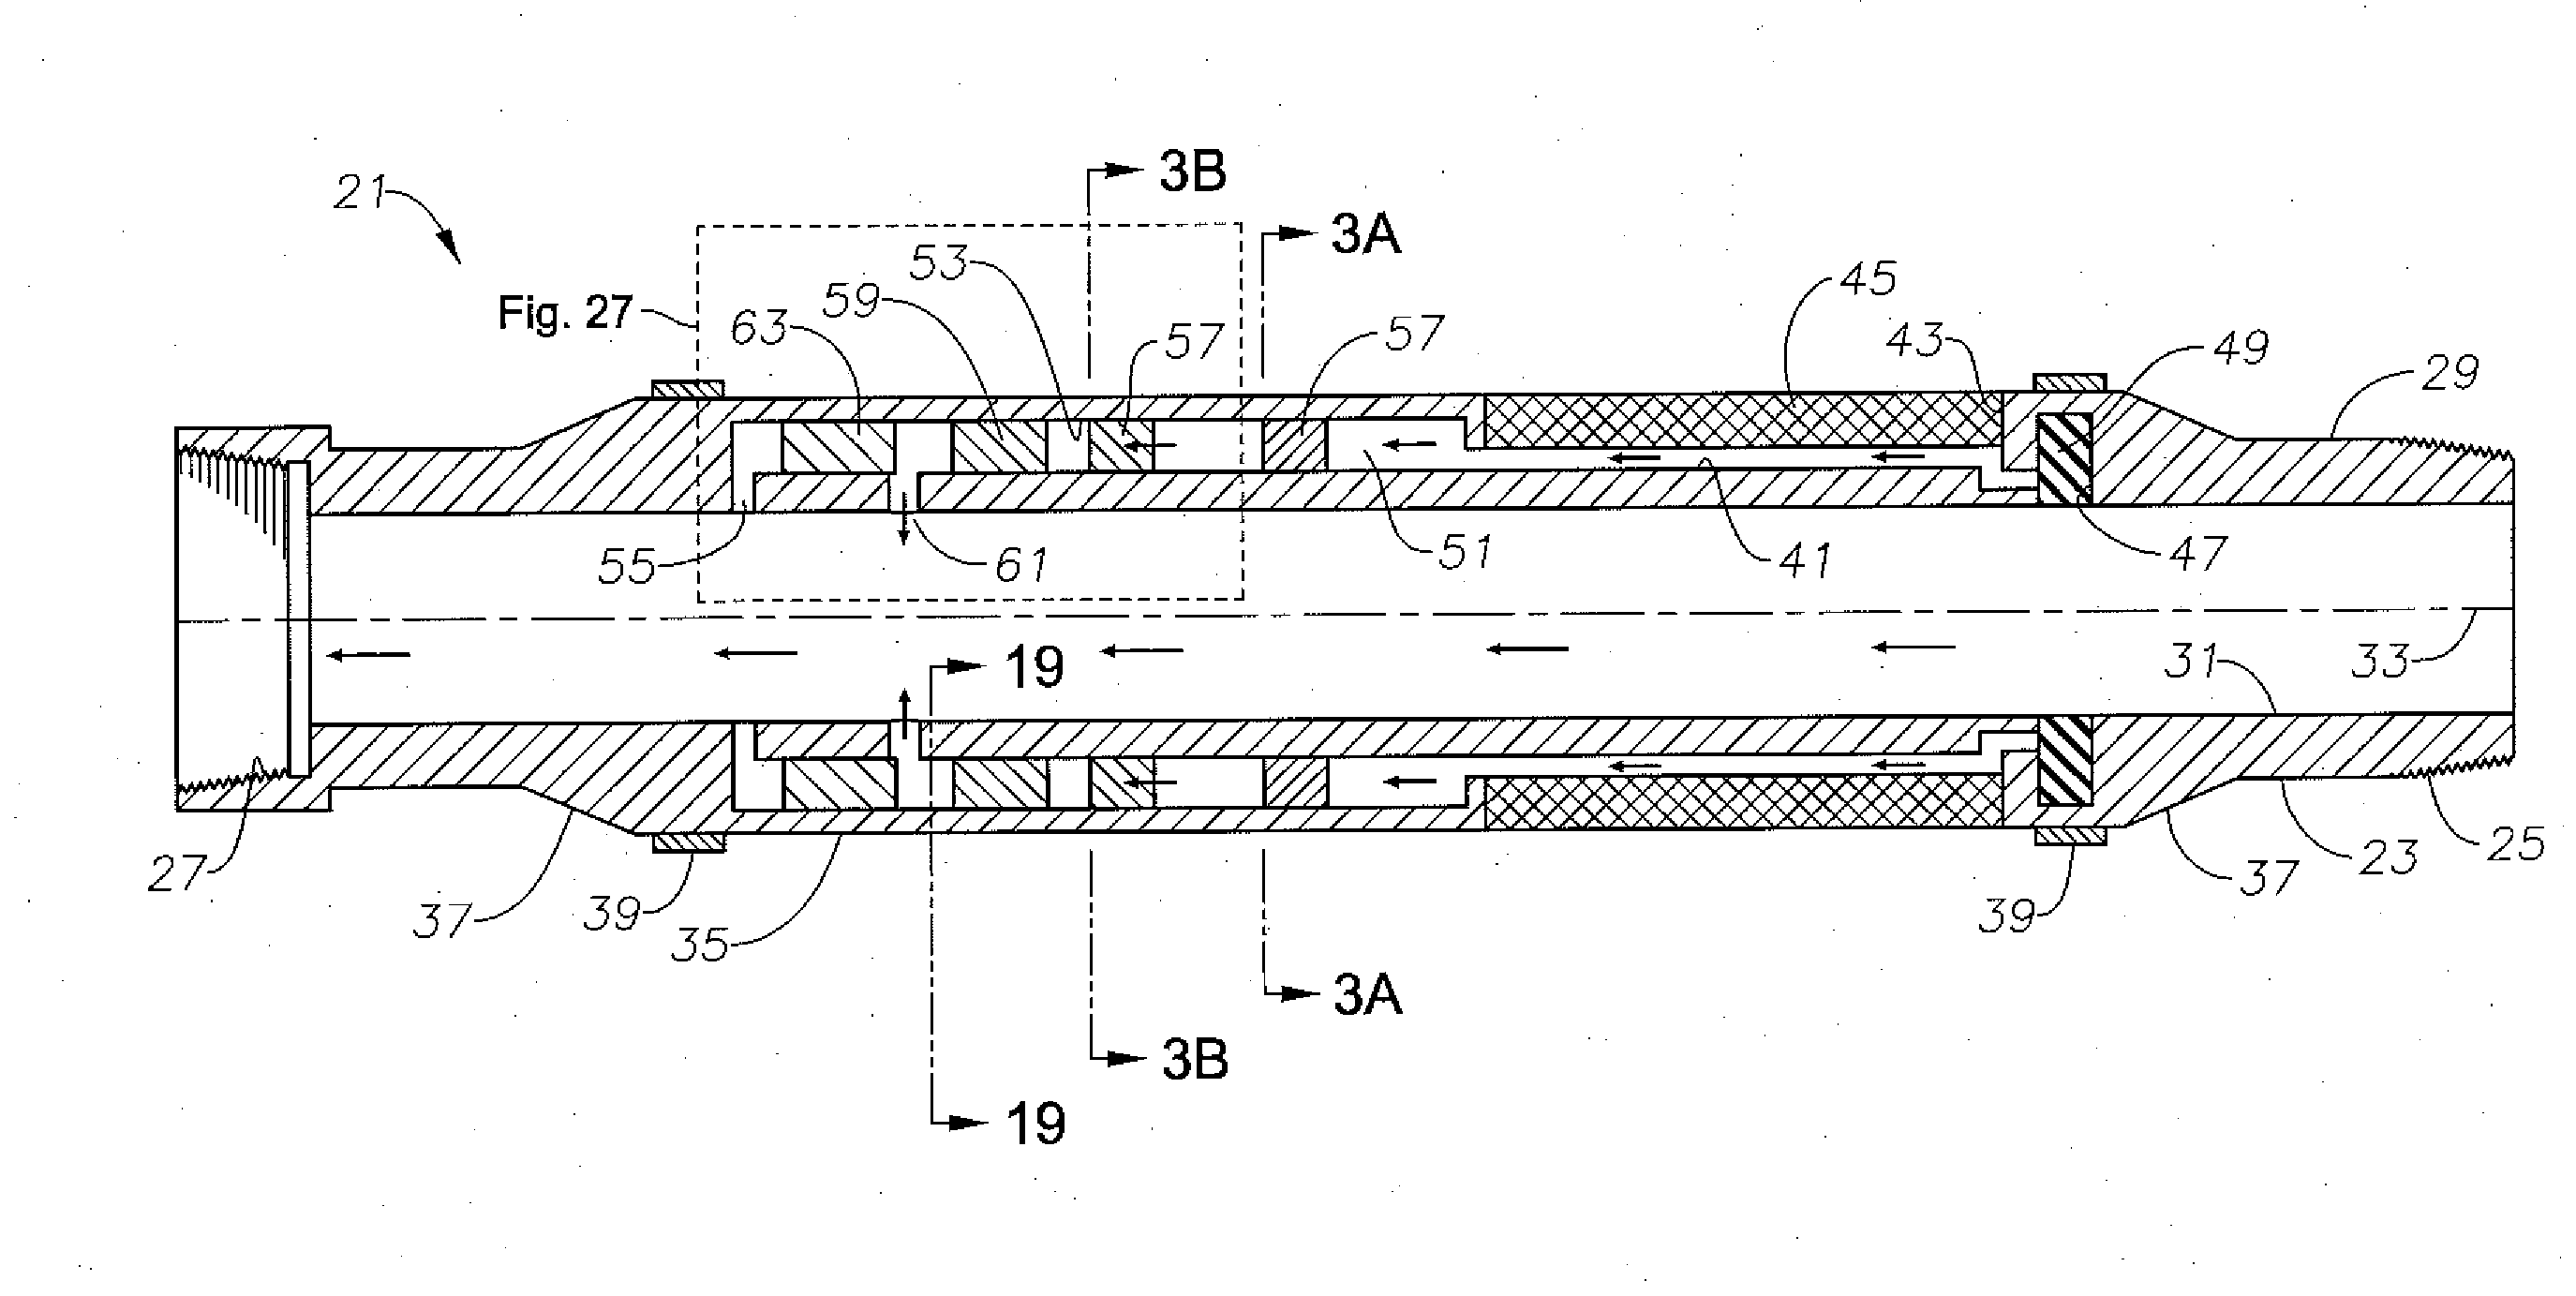 Self-controlled inflow control device